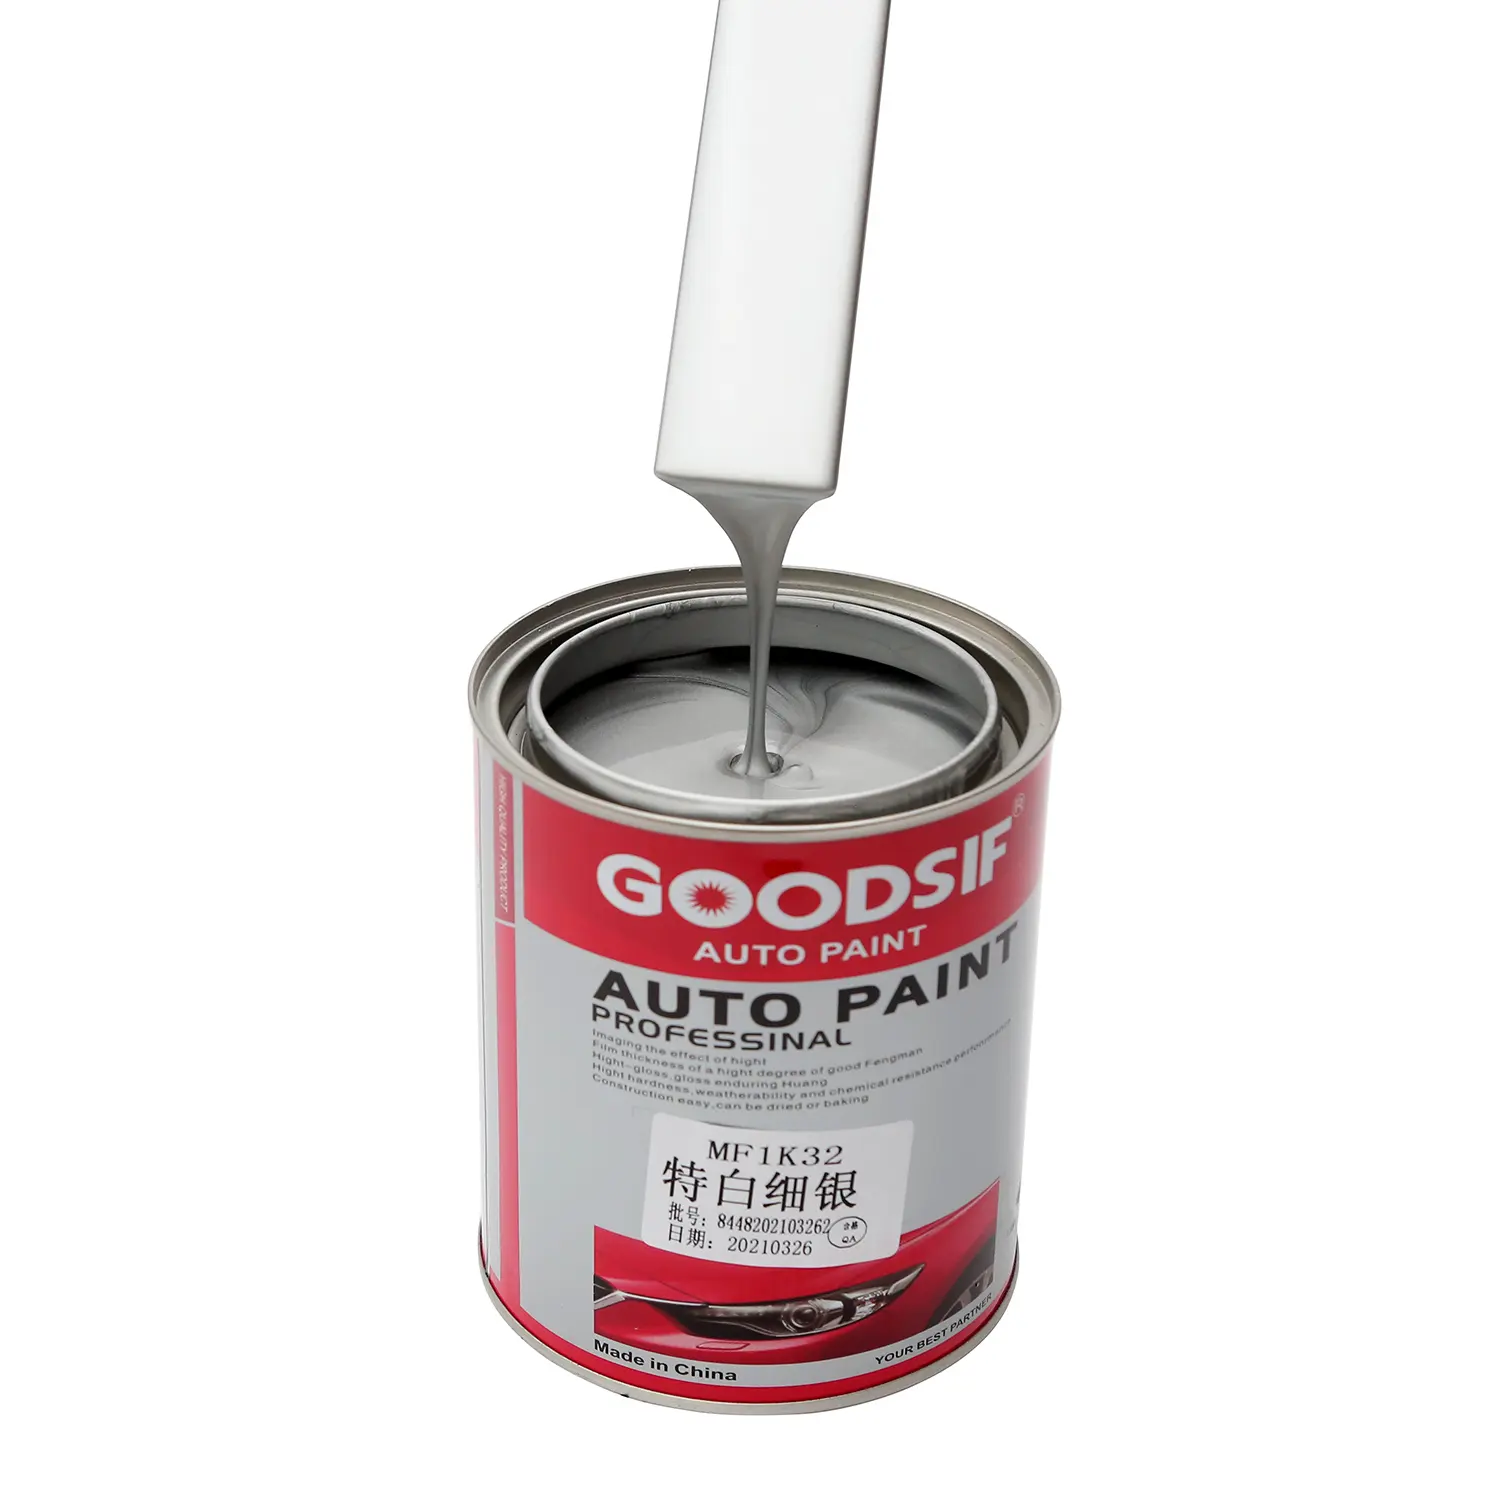 professional use car care shop products auto base coating 1K silver metallic color car body repair paint